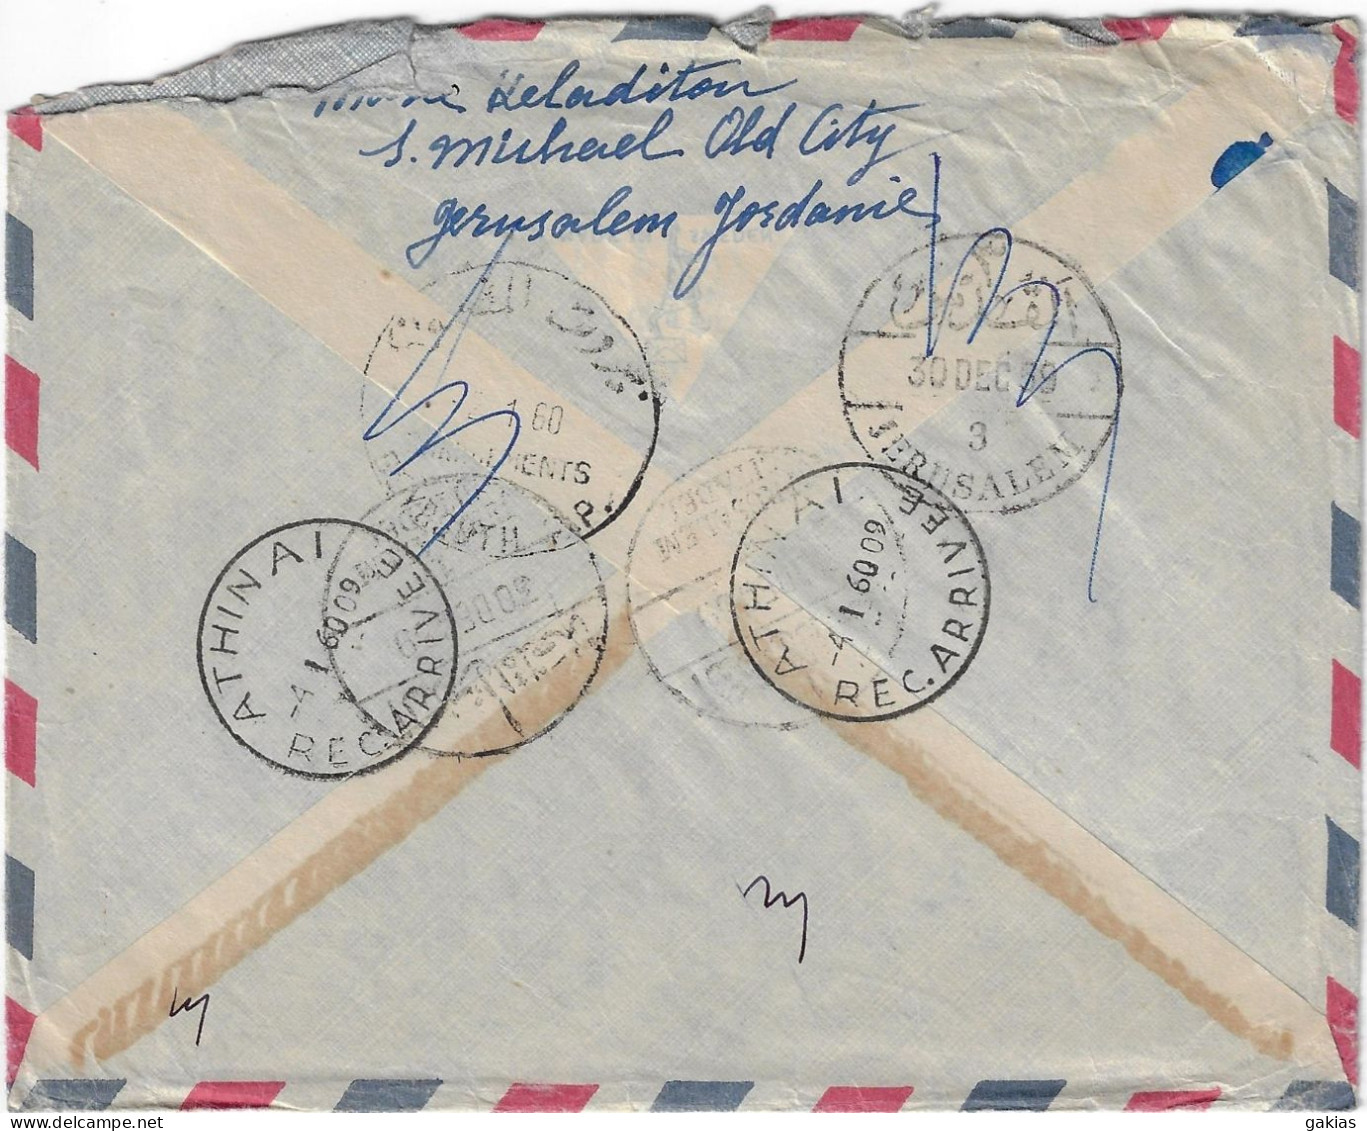 GREECE/ARRIVAL, 30-12-1959 REG. AIR COVER JERUSALEM/JORDAN VIA BEYROUTH TO ATHENS. WITH CONTENTS. - Storia Postale